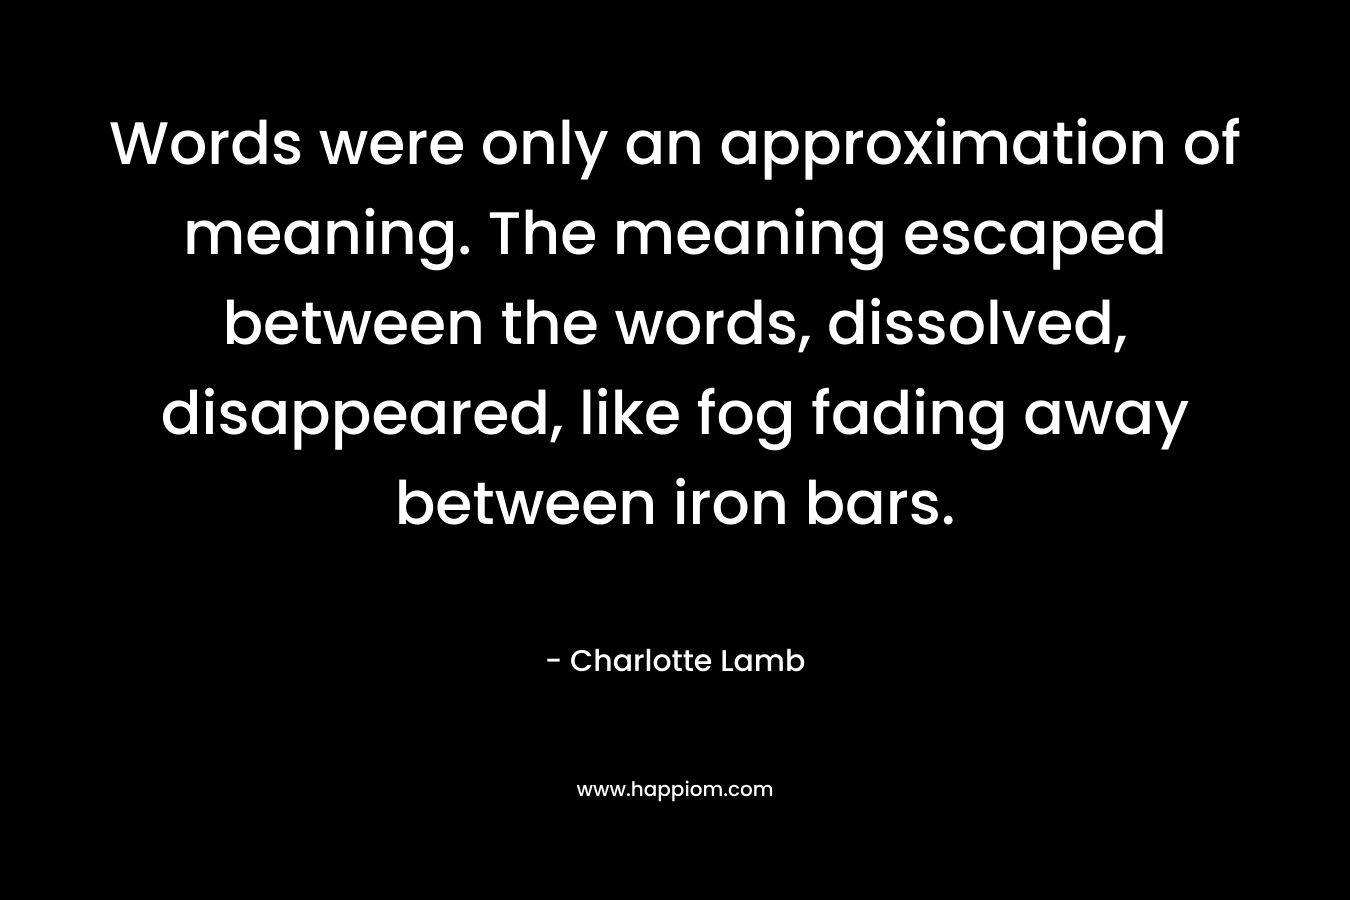 Words were only an approximation of meaning. The meaning escaped between the words, dissolved, disappeared, like fog fading away between iron bars.